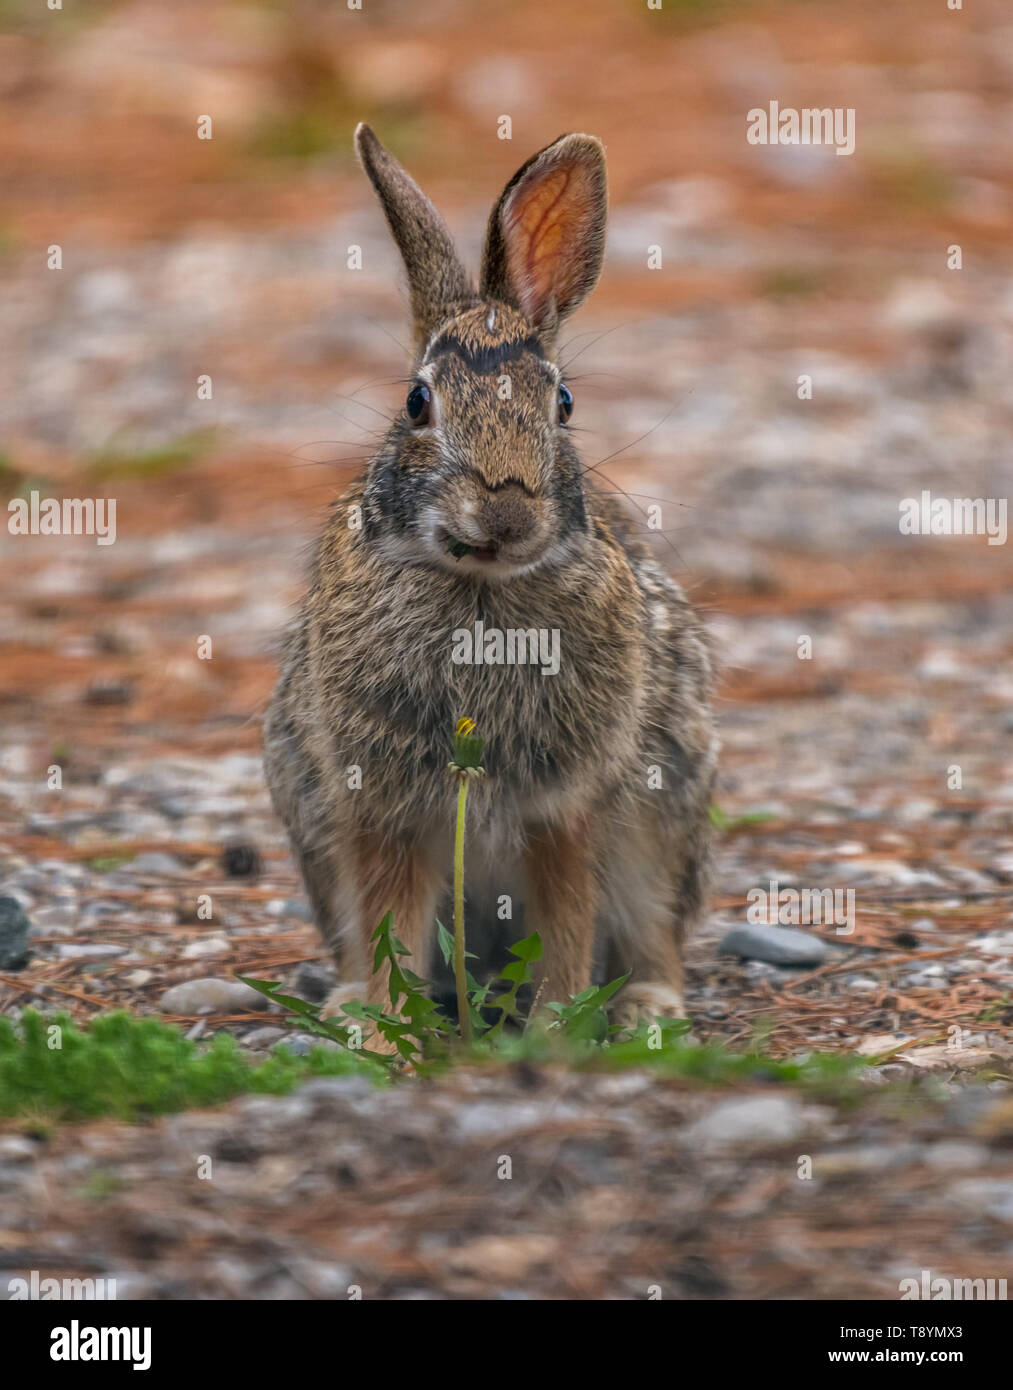 Eastern Cottontail Rabbit (Sylvilagus floridanus) behind a Common Dandelion (Taraxacum officinale) on a gravel driveway in the spring in Michigan, USA Stock Photo